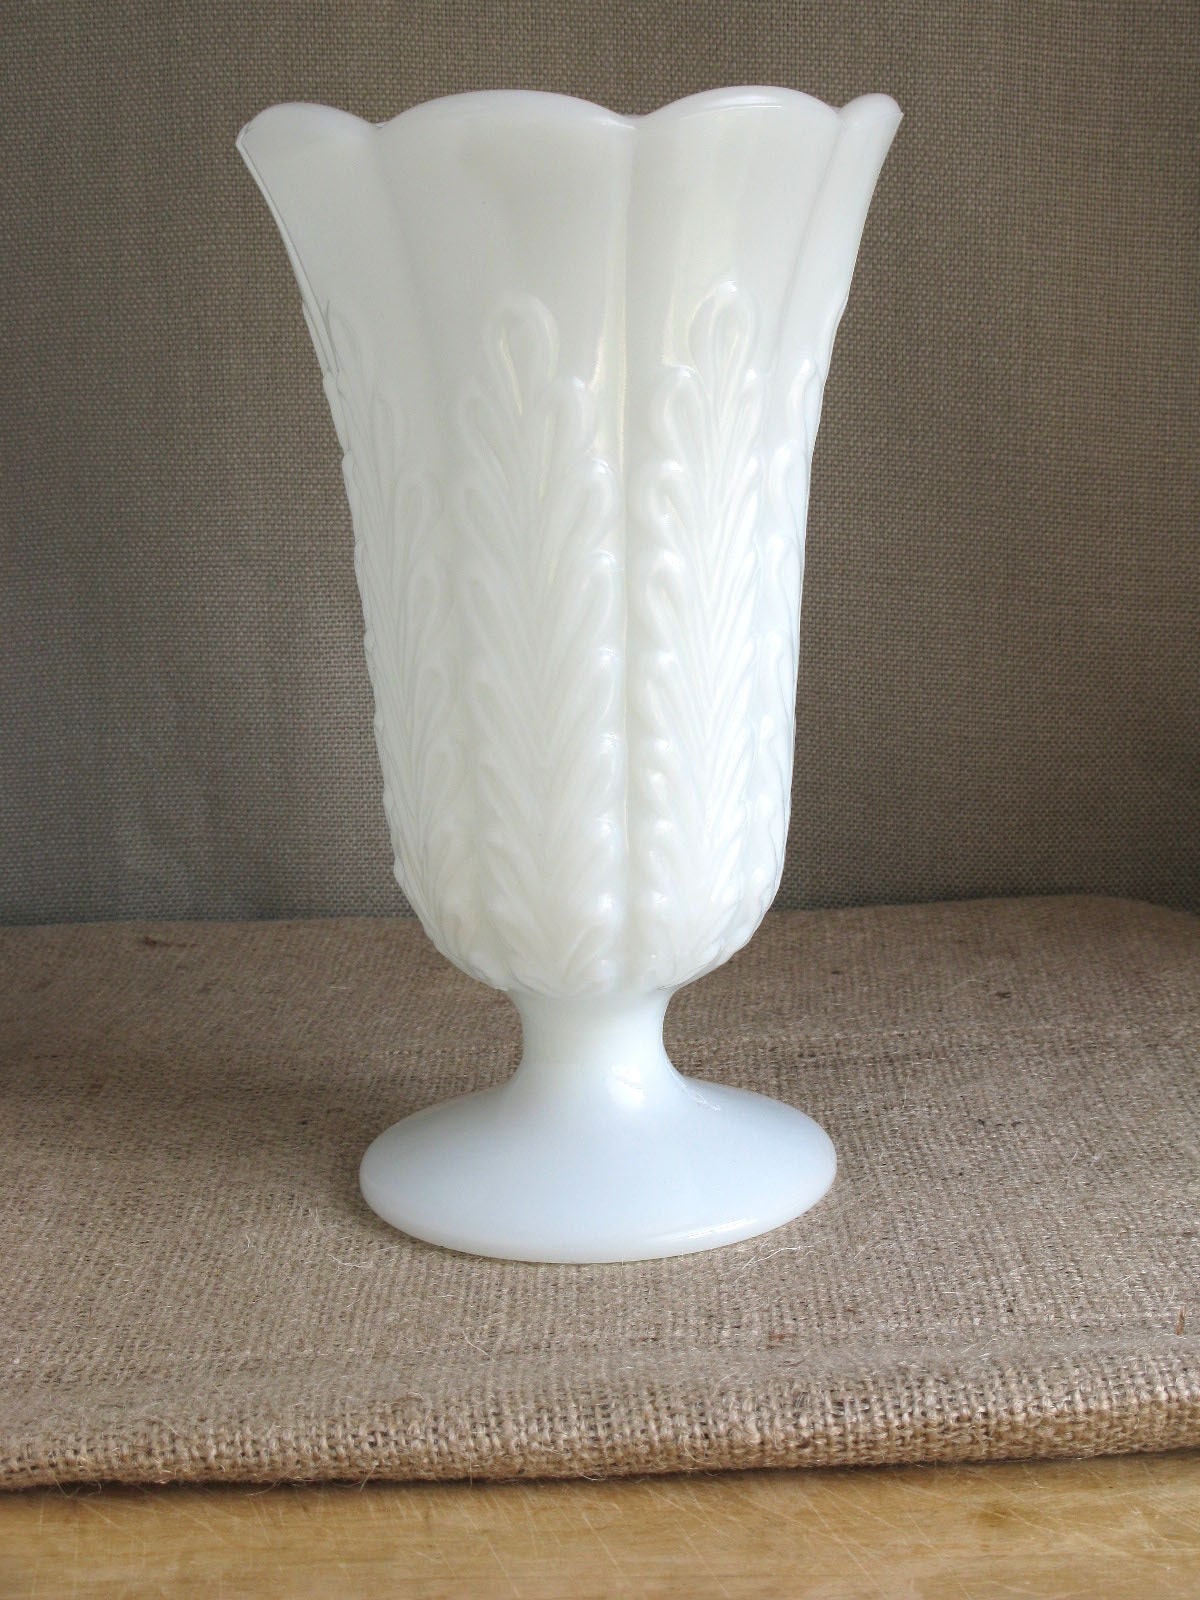 Scalloped Edge Milk Glass Vase with Pressed Leaf Pattern